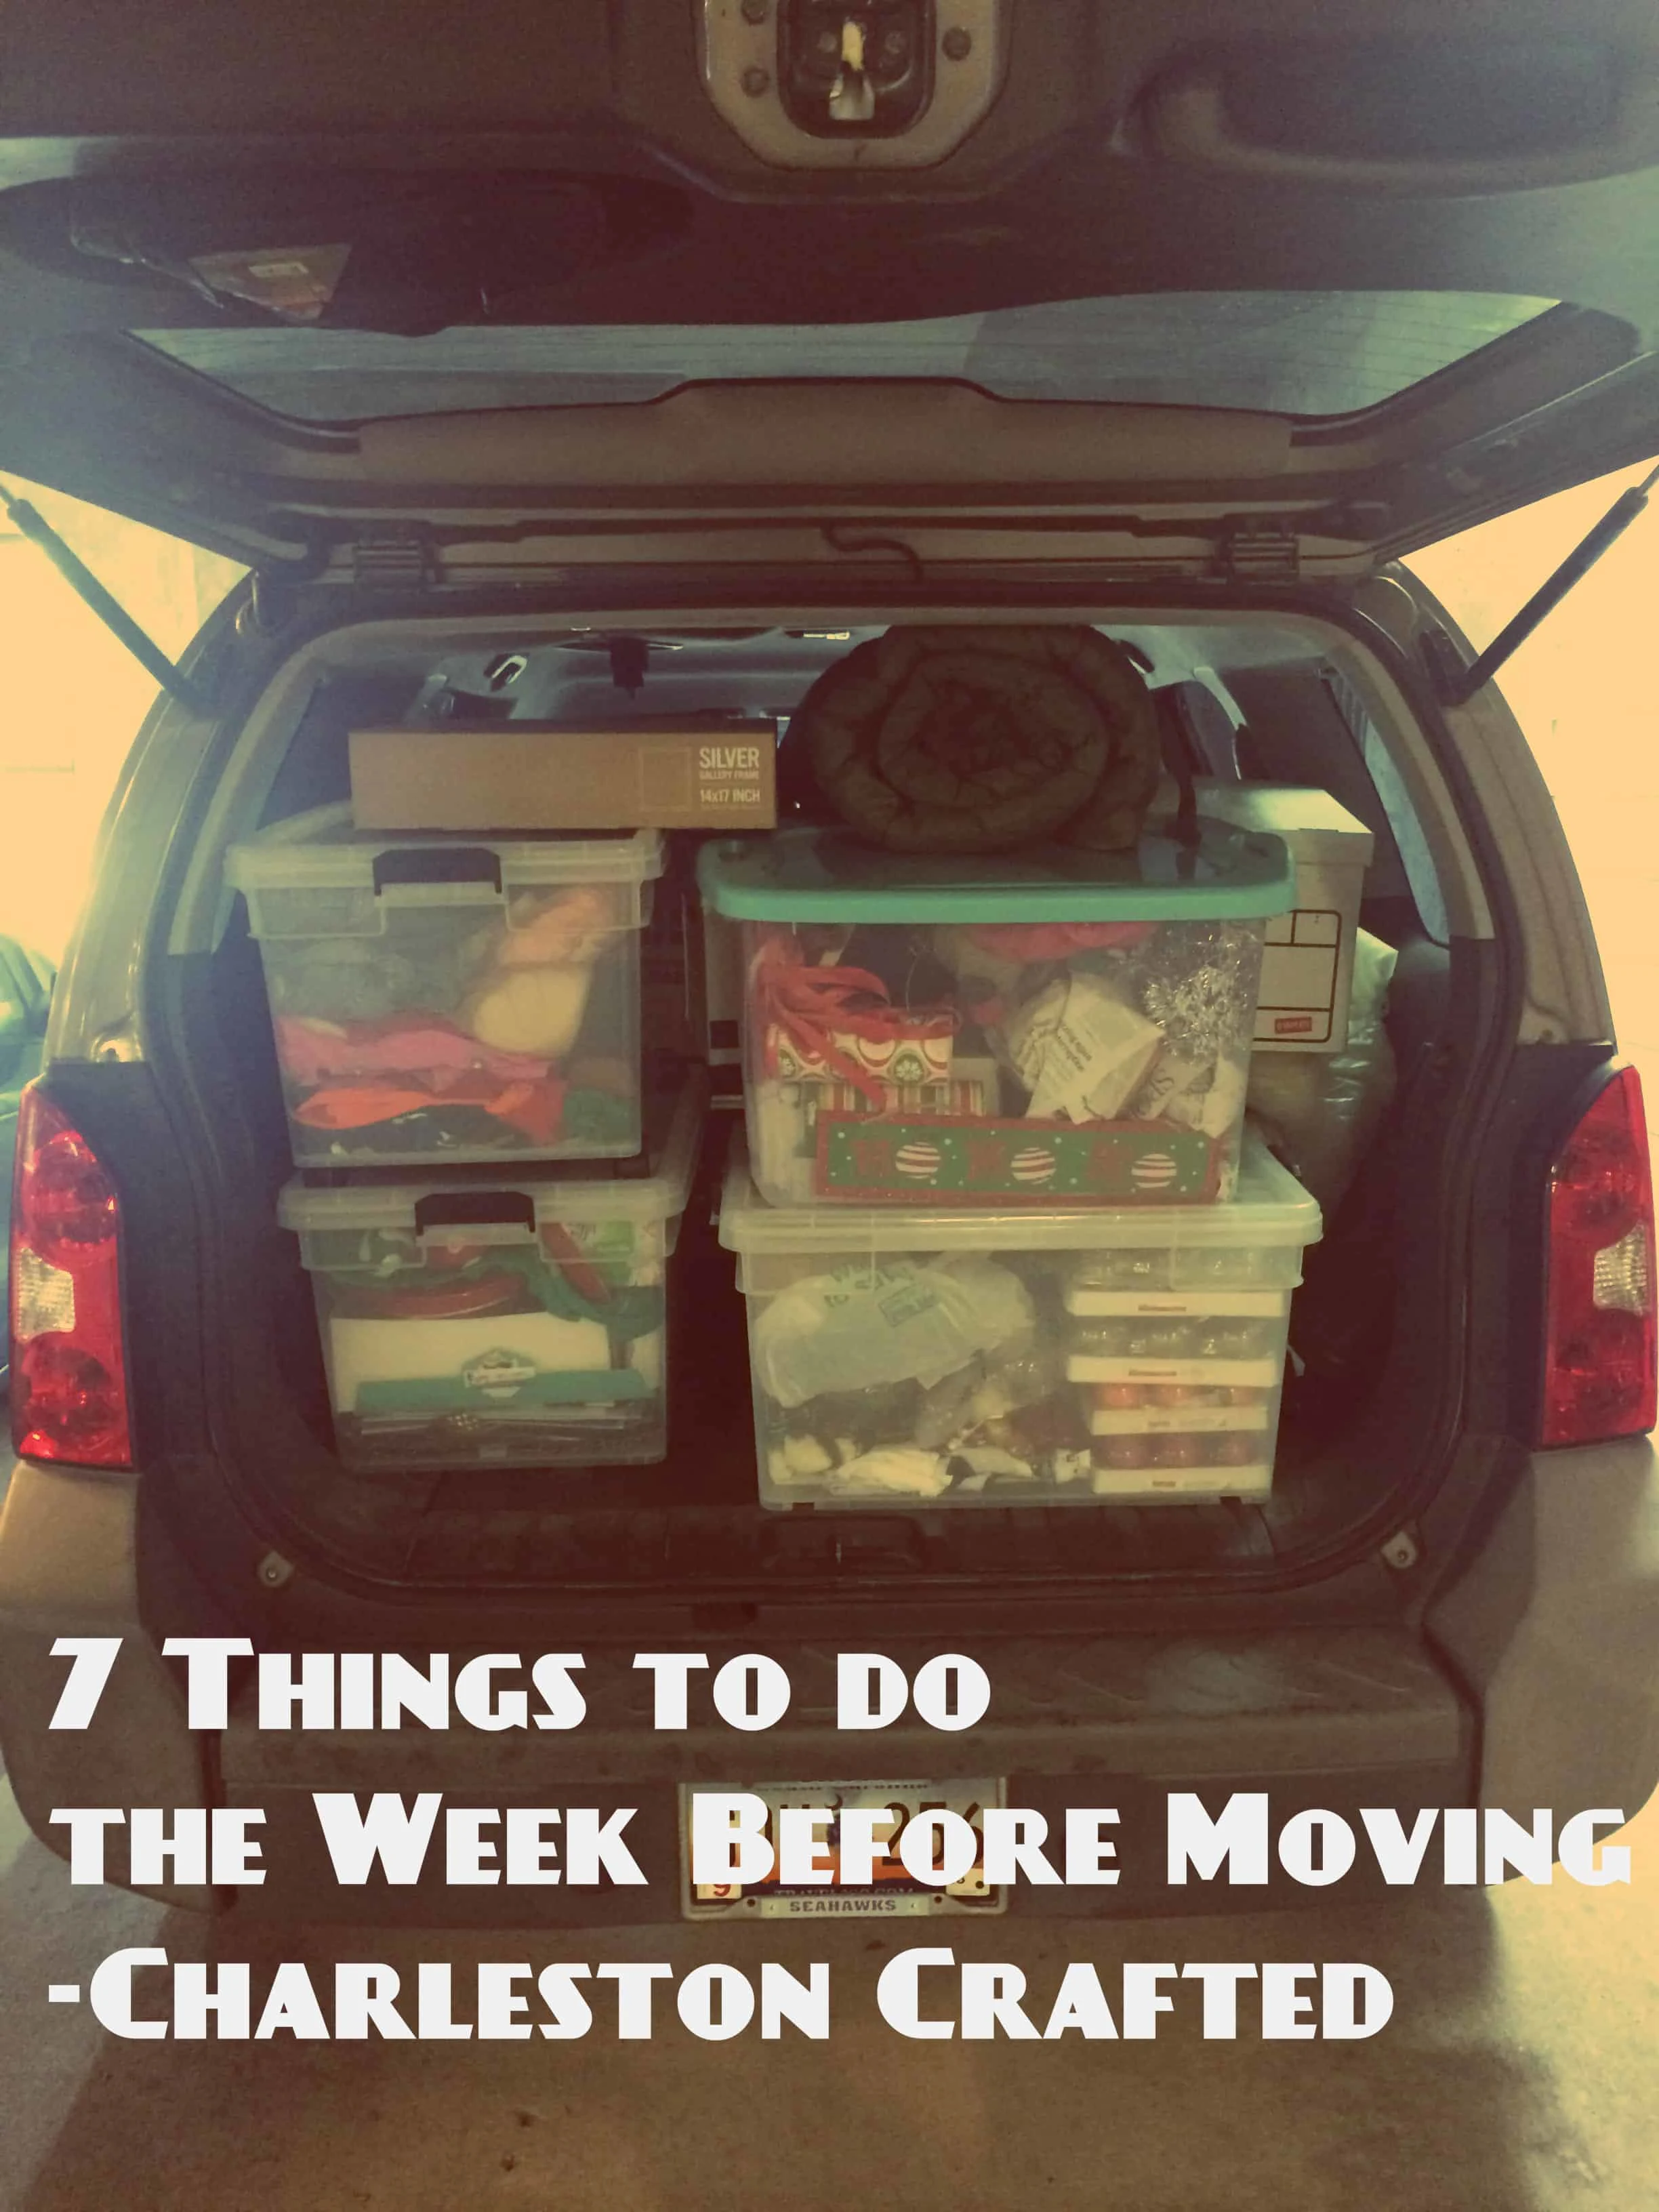 7 Things to do the Week Before Moving - Charleston Crafted